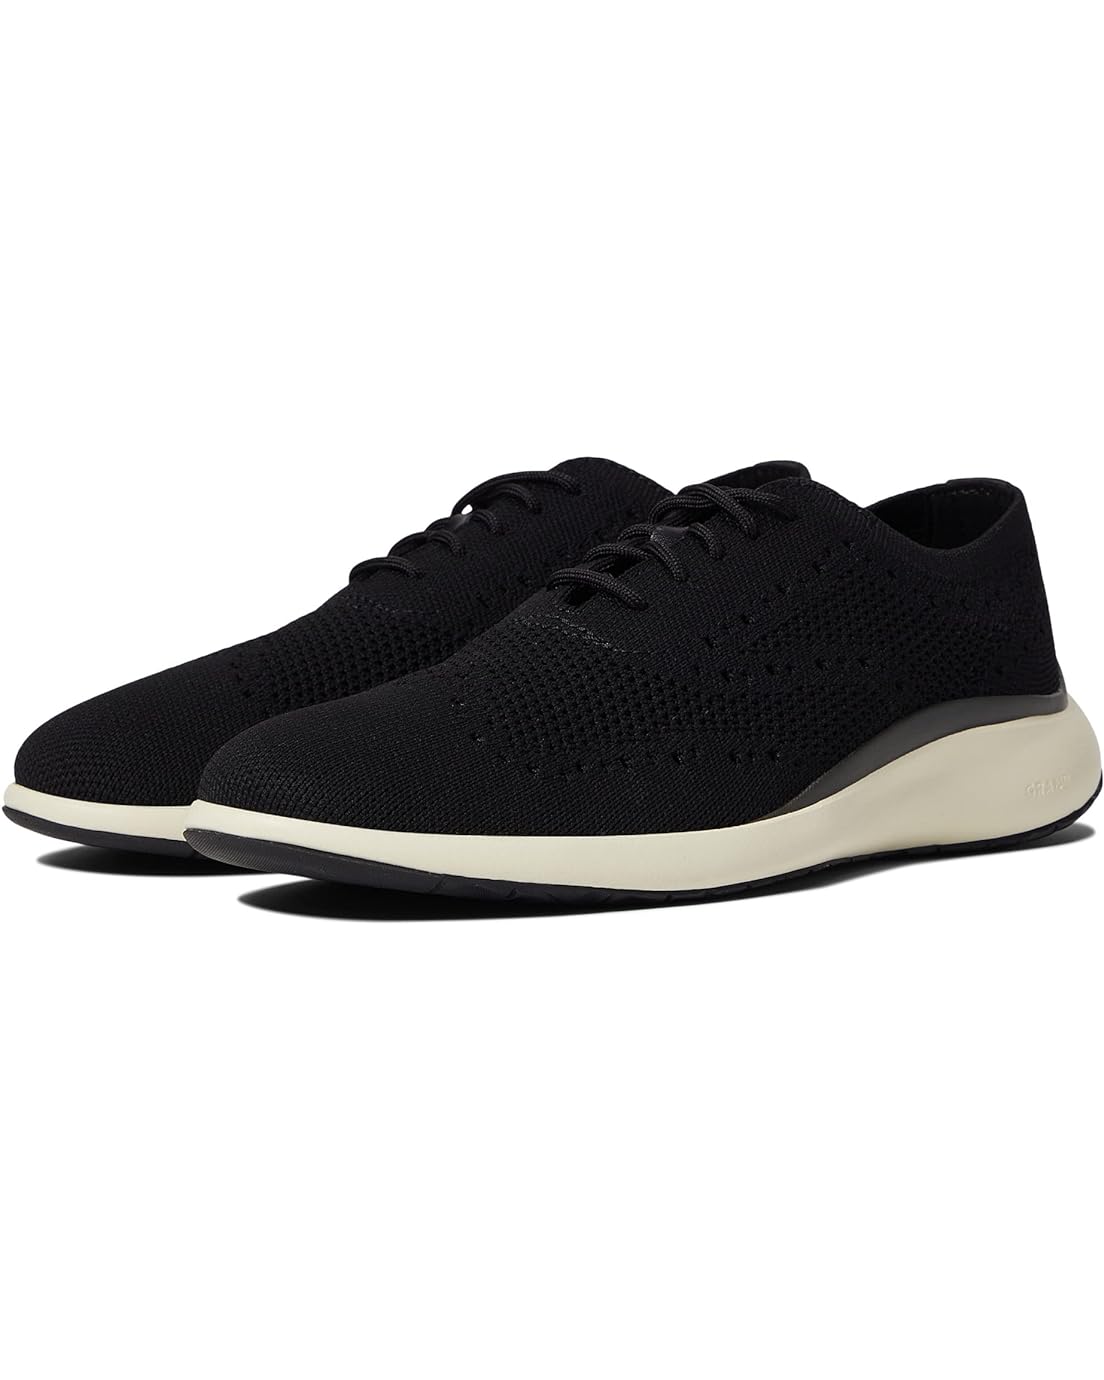 Cole Haan Grand Troy Knit Oxford